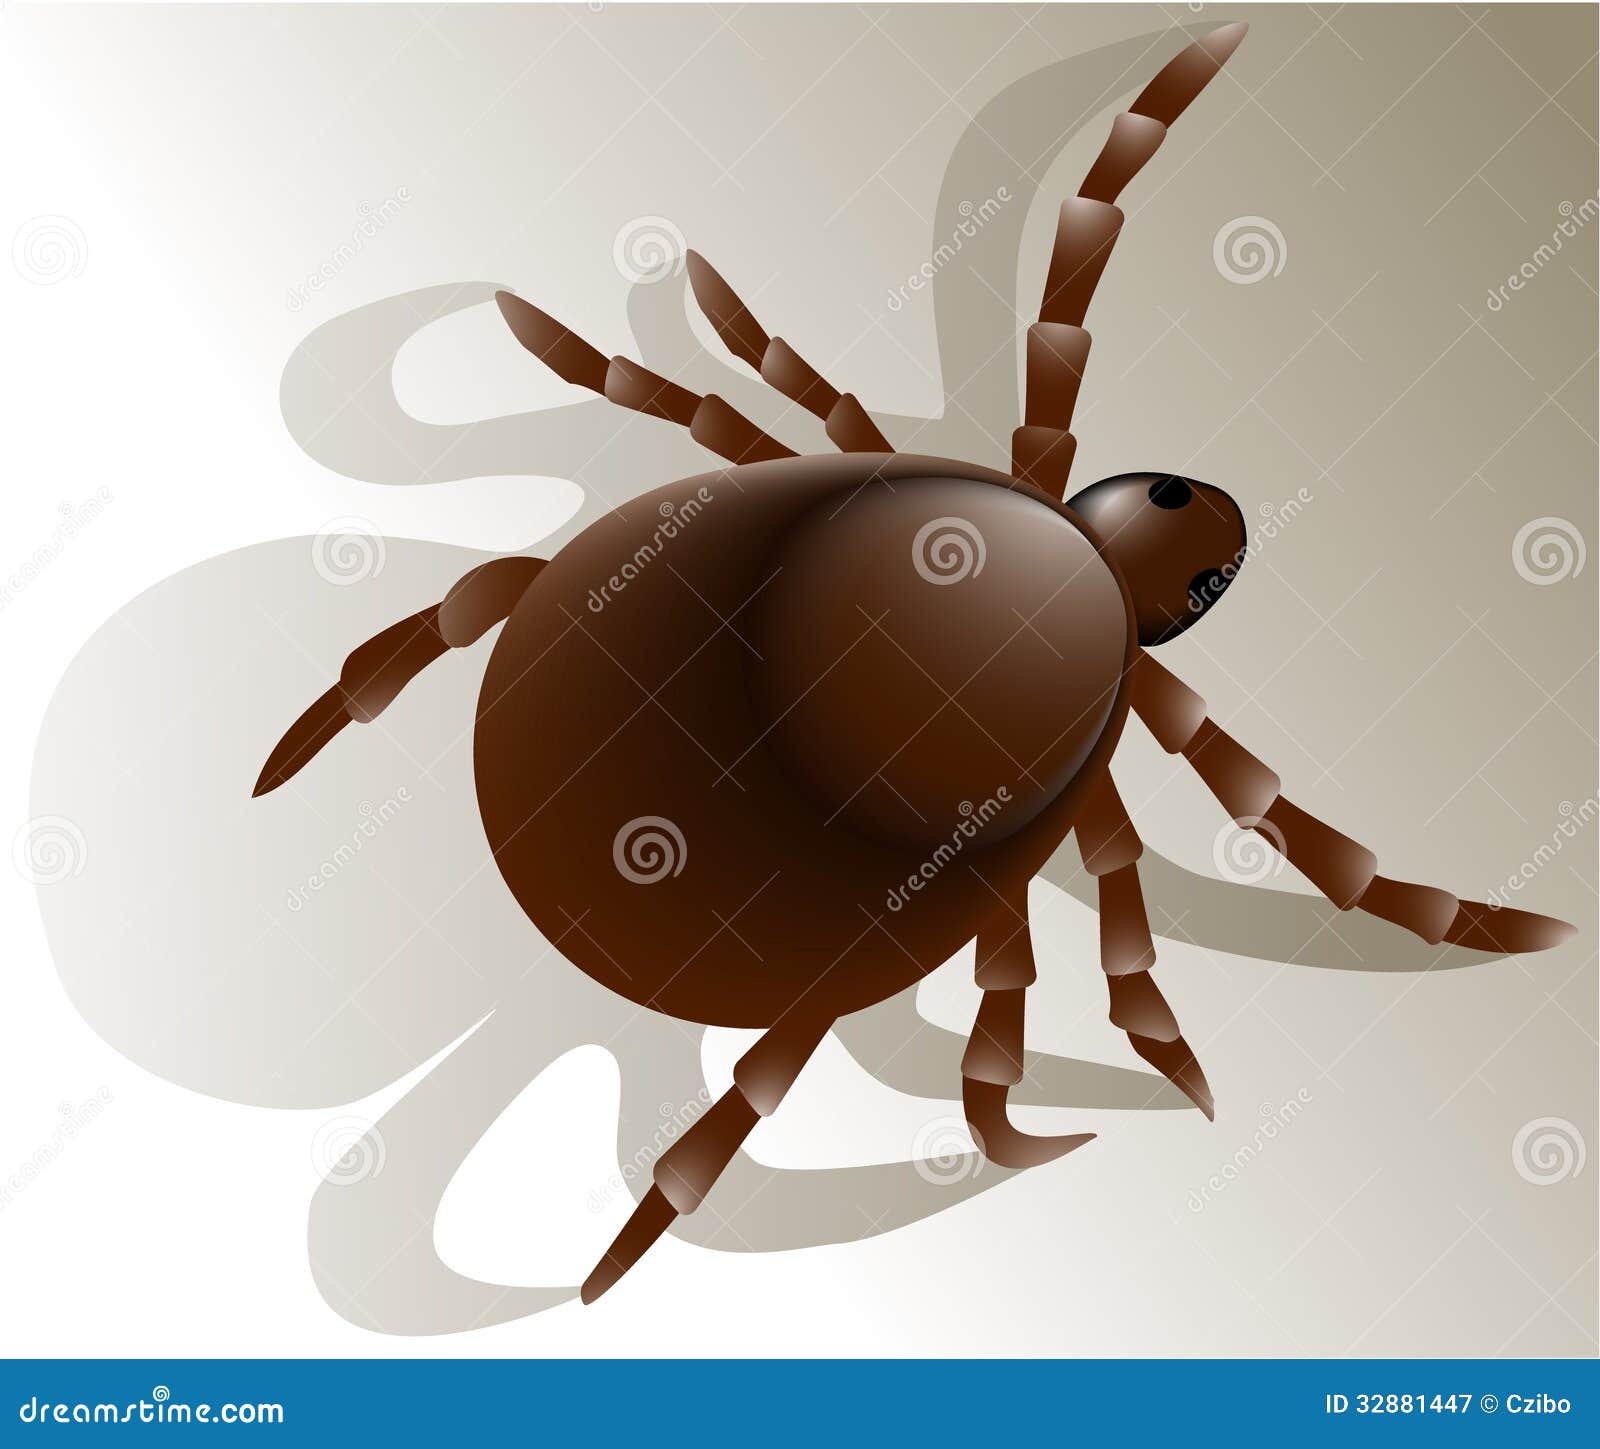 tick insect